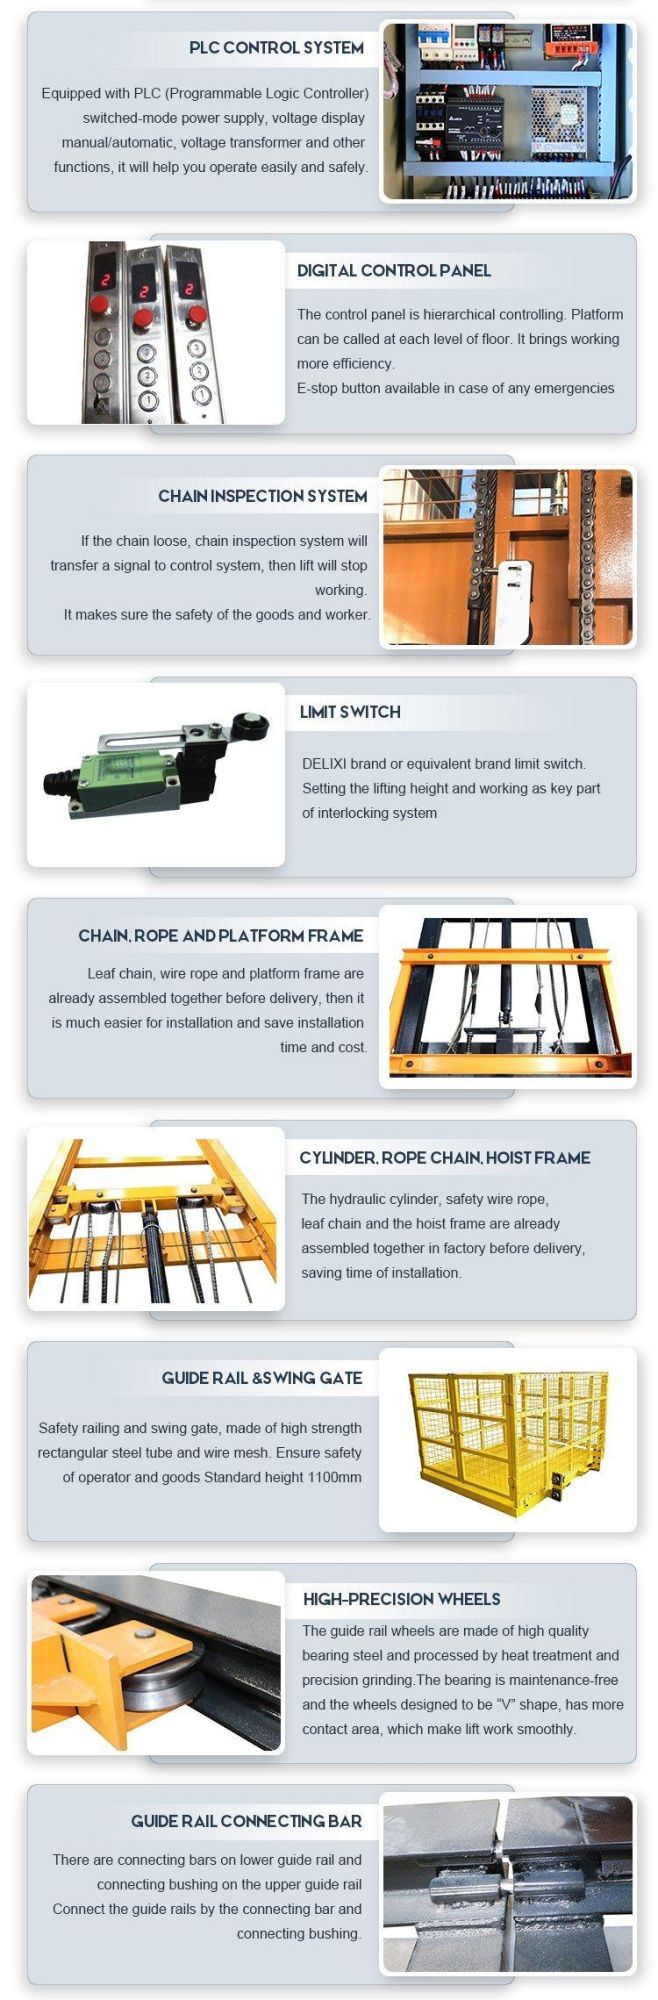 Morn Fixed Warehouse Cargo Vertical Post Elevator Lift Lifting Materials and Goods